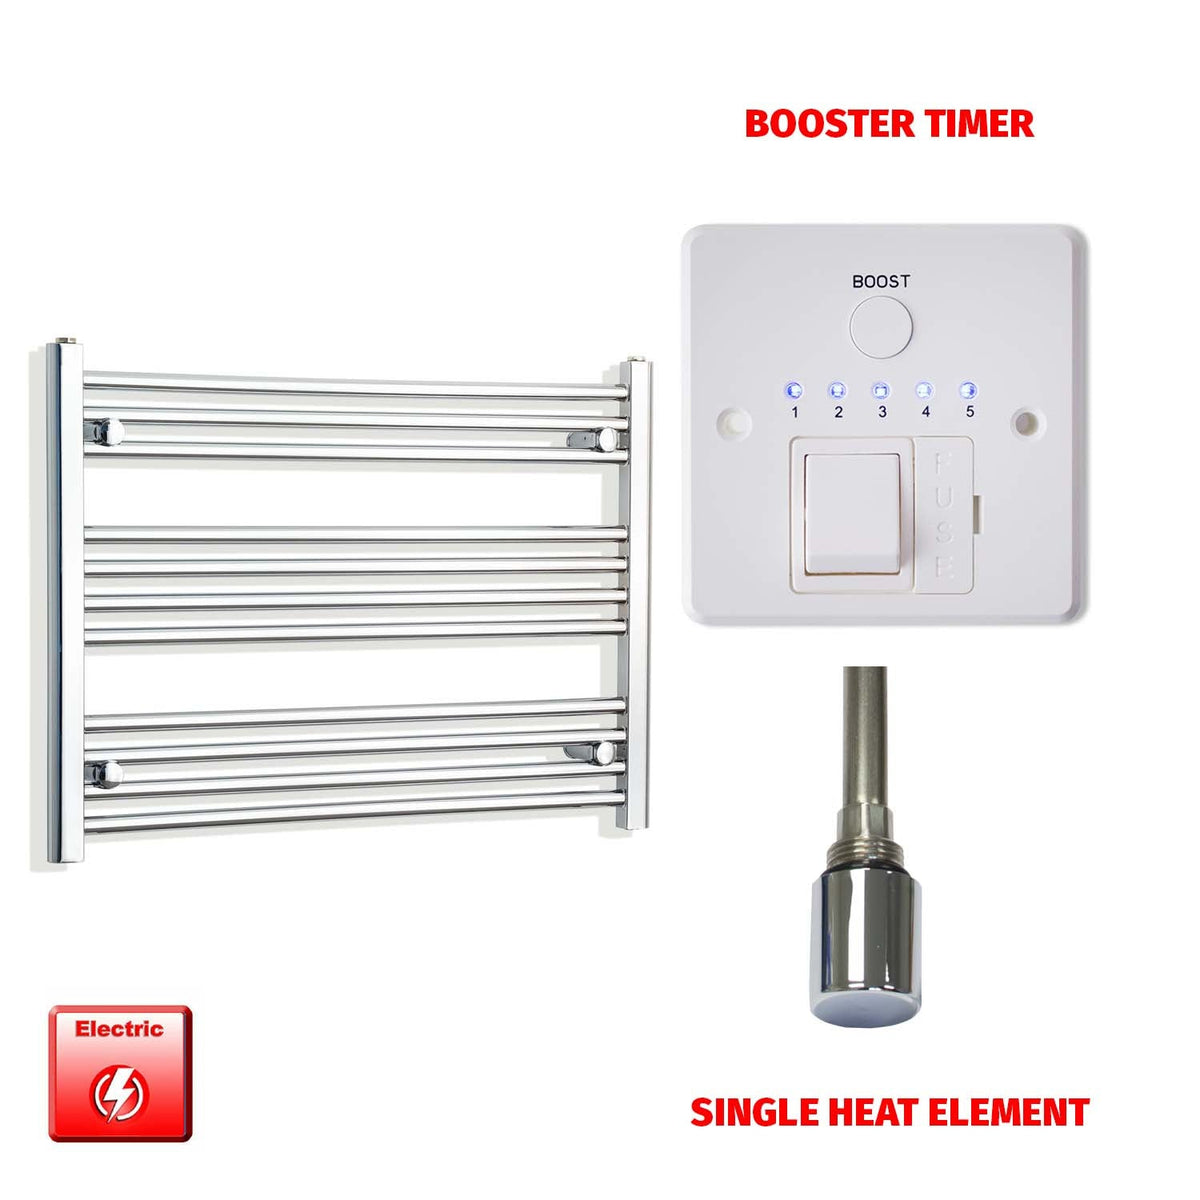 600mm High 800mm Wide Pre-Filled Electric Heated Towel Rail Radiator Straight Chrome Single heat element Booster timer